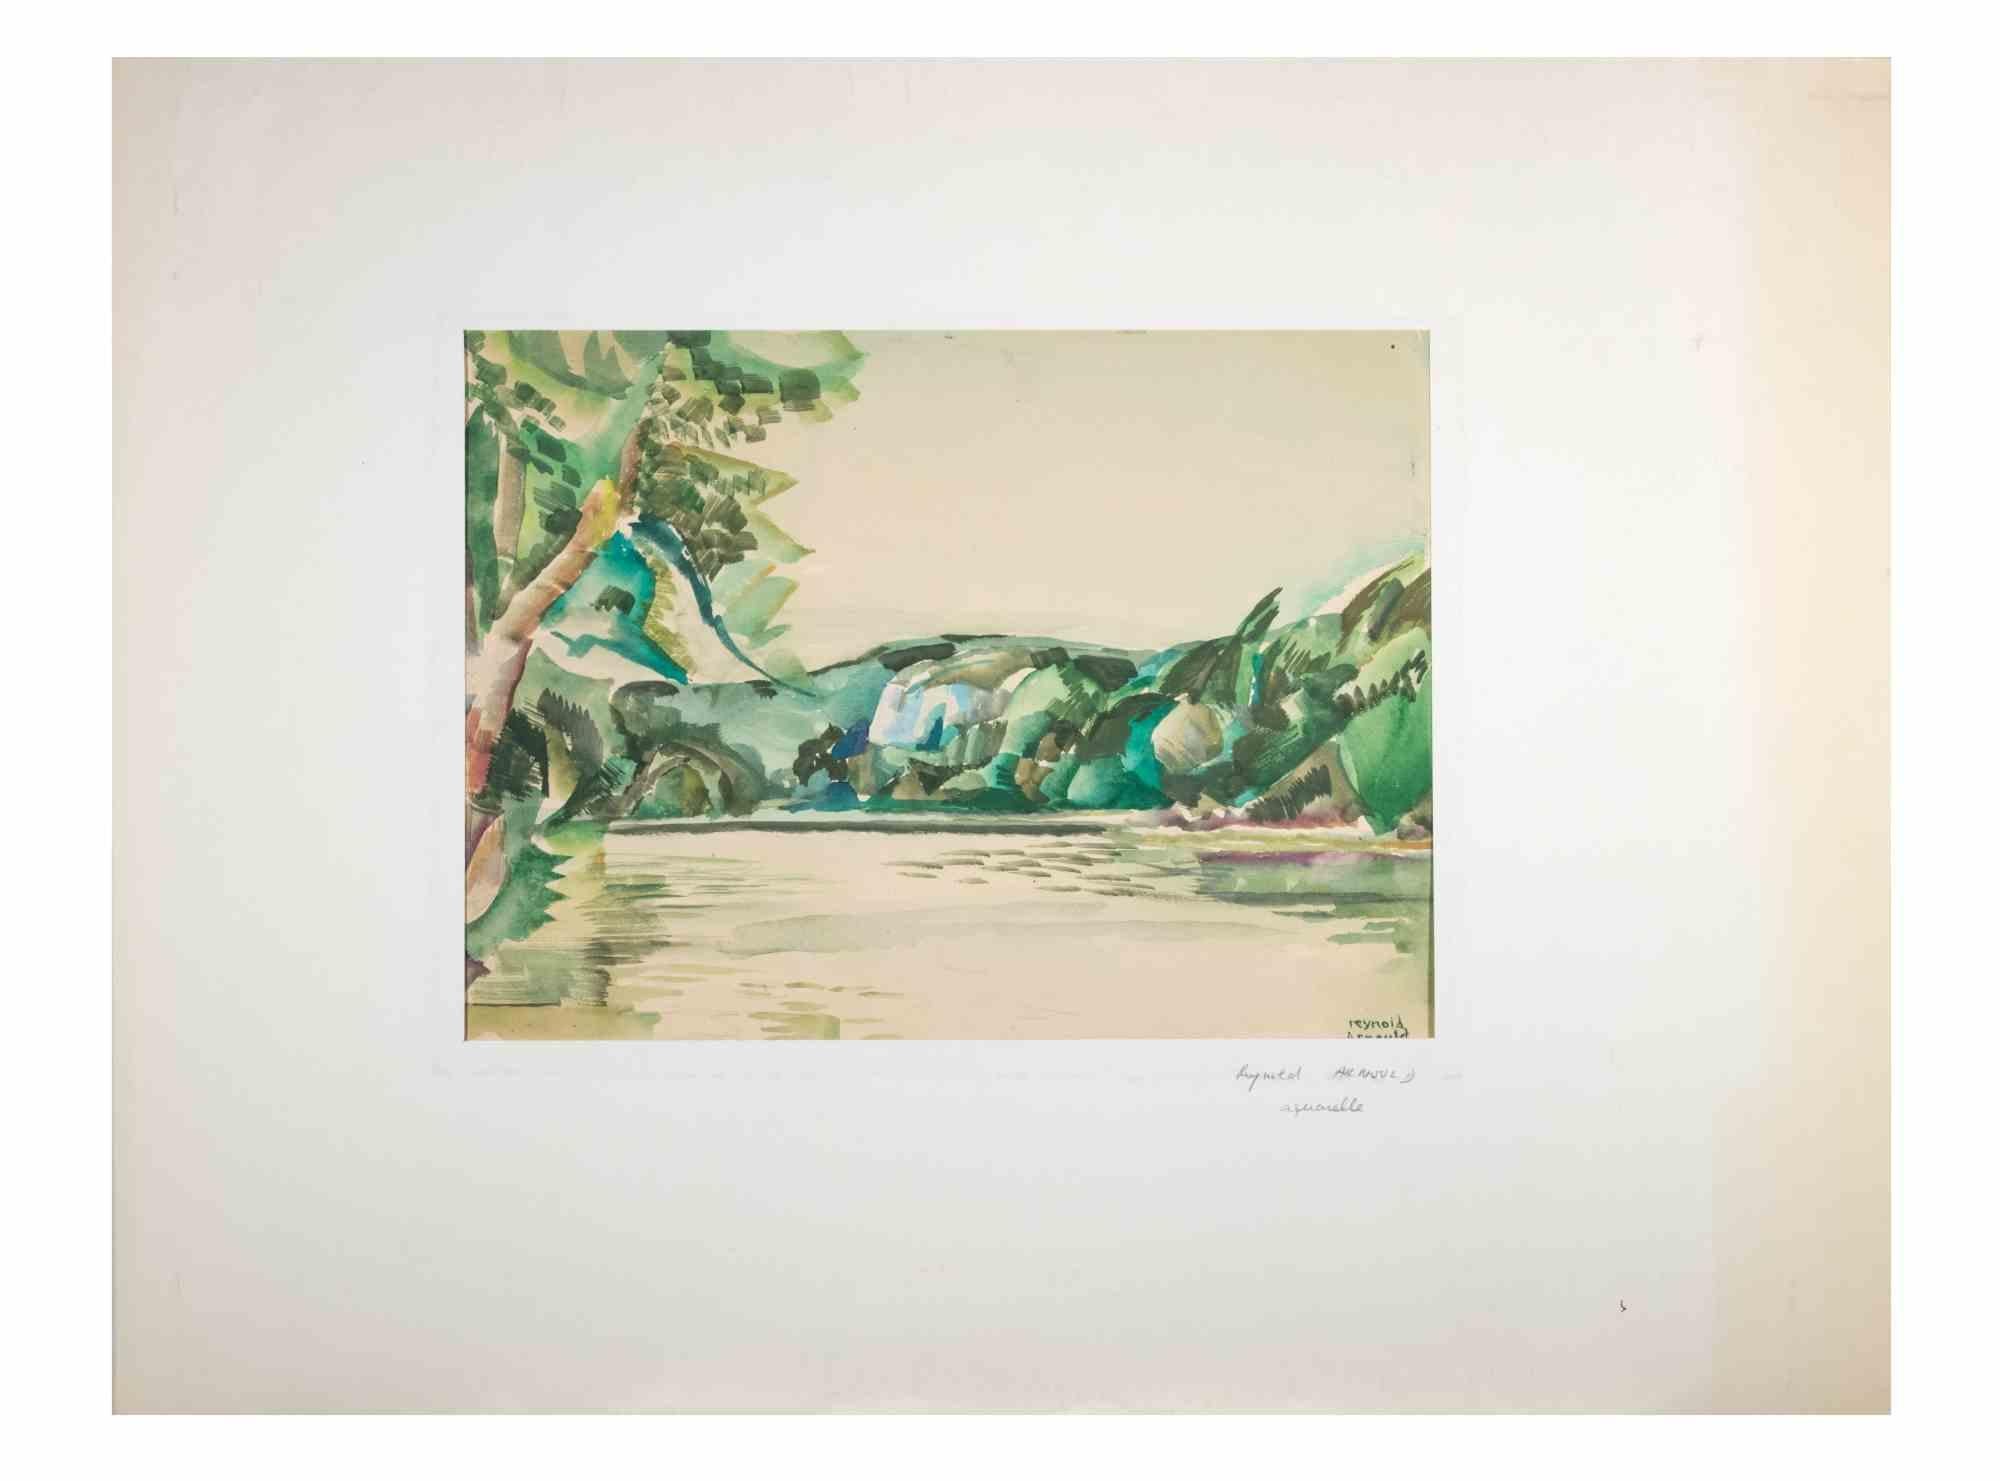 Landscape is a Watercolor realized by Reynold Arnould  (Le Havre 1919 - Parigi 1980).

Good condition included a white cardboard passpartout (51x66 cm).

Hand-signed on the lower right corner.

Reynold Arnould was born in Le Havre, France in 1919.